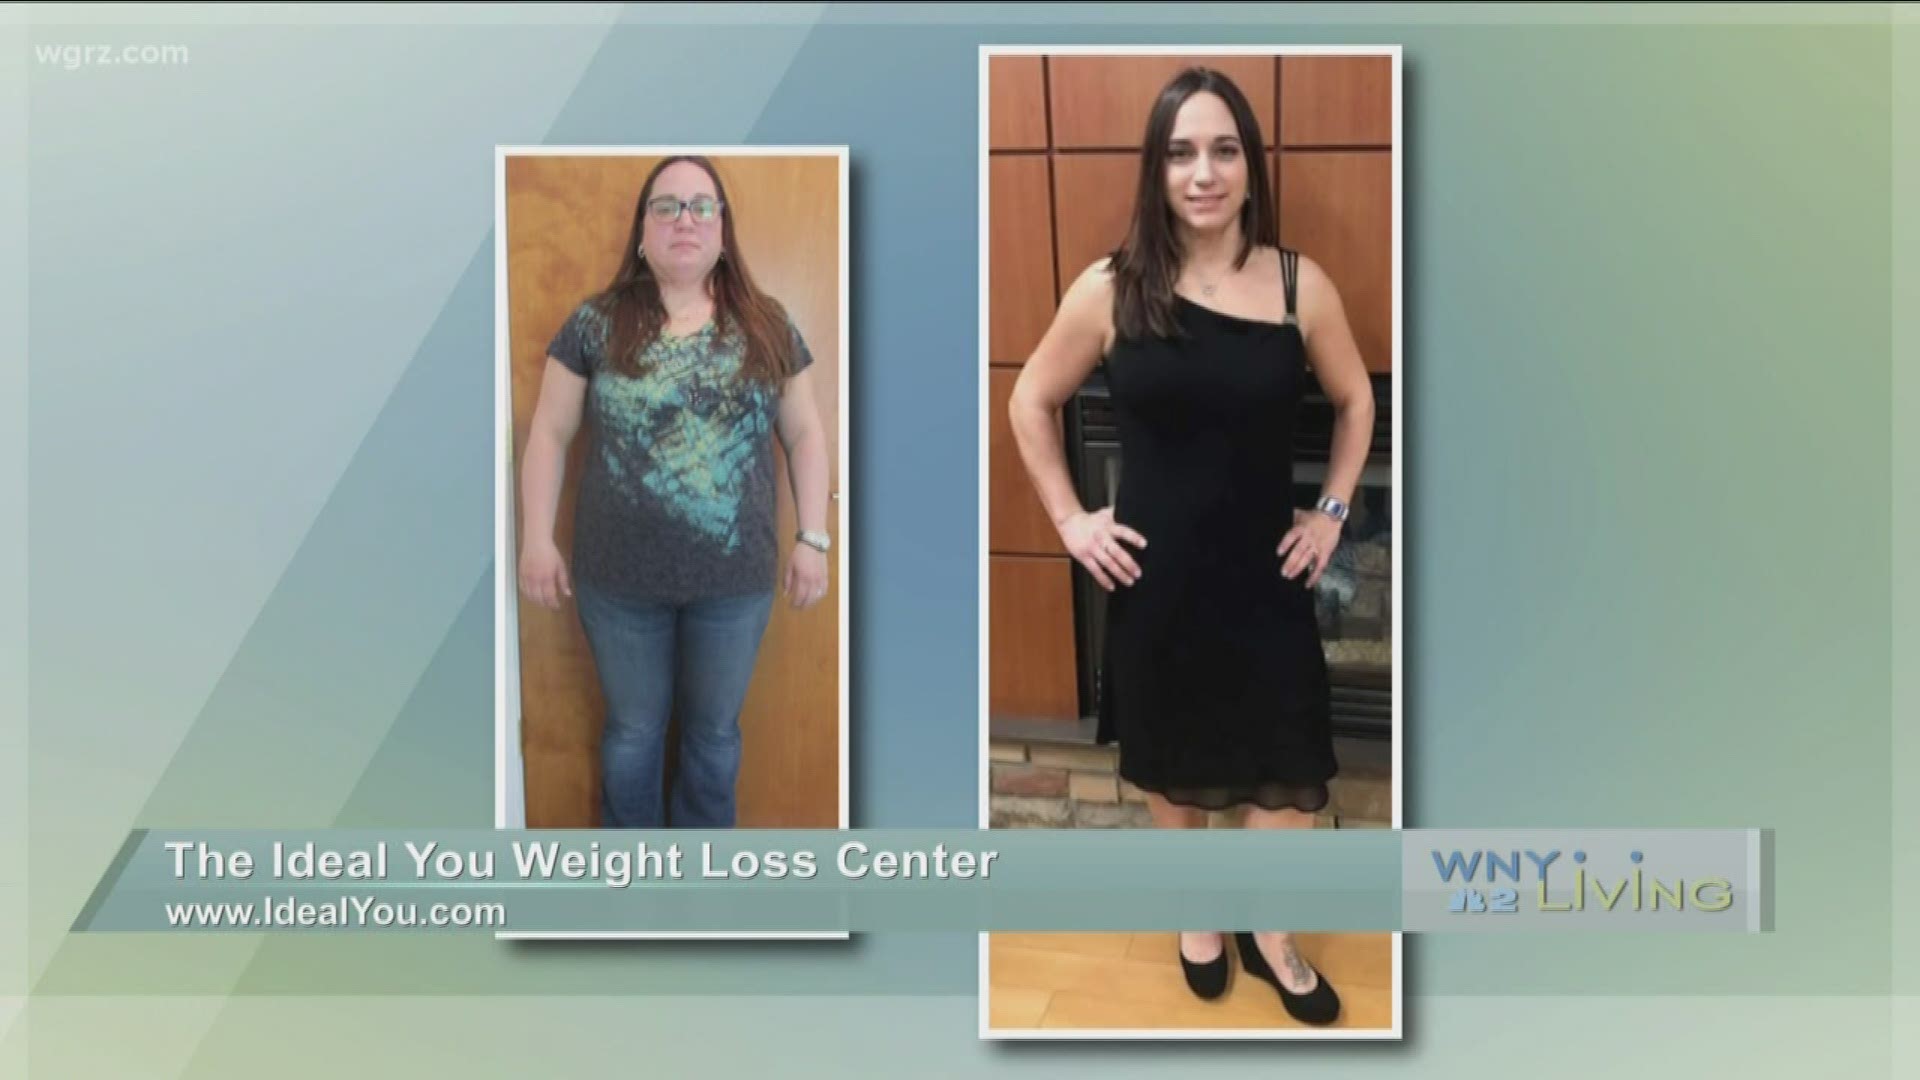 February 22 - The Ideal You Weight Loss Center (THIS VIDEO IS SPONSORED BY THE IDEAL YOU WEIGHT LOSS CENTER)